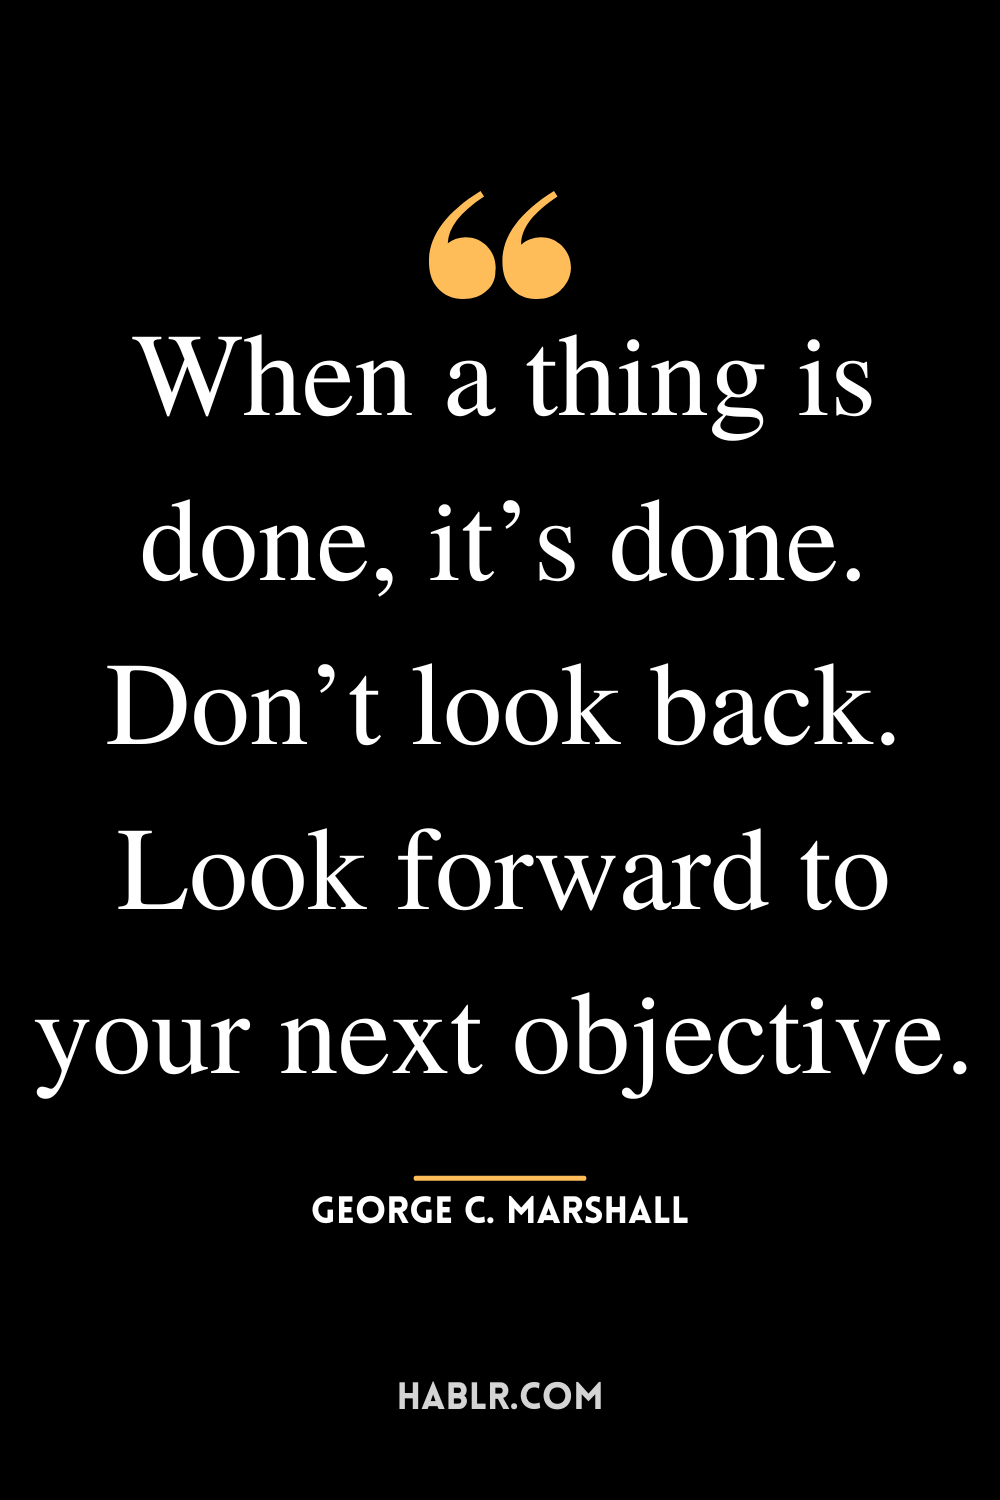 “When a thing is done, it’s done. Don’t look back. Look forward to your next objective.”-George C. Marshall